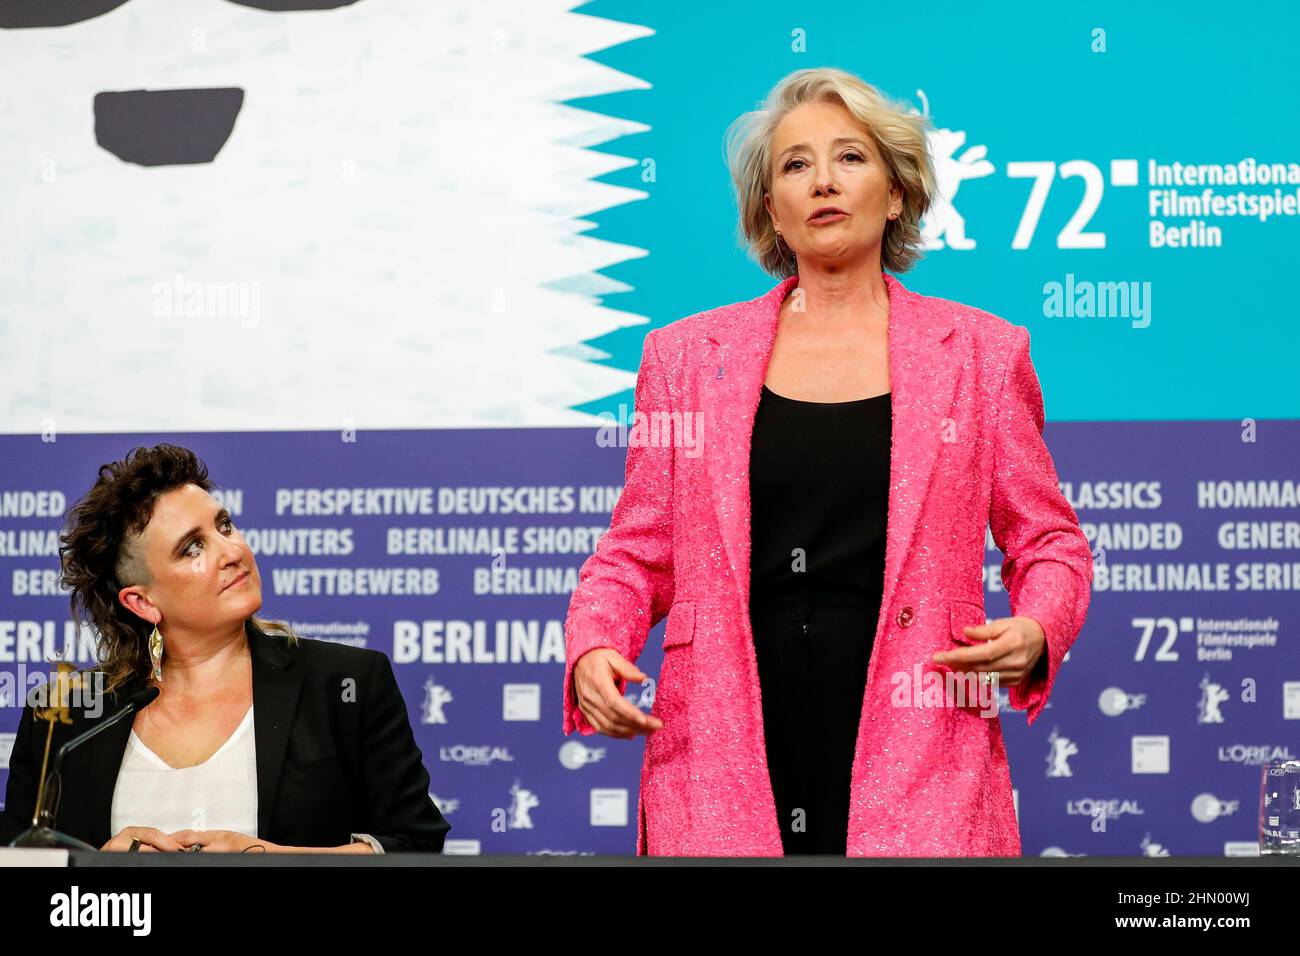 Berlin, Germany. 12th Feb, 2022. Sophie Hyde (l) and Emma Thompson at the press conference for the film "Good Luck to You, Leo Grande", which is part of the "Berlinale Special Gala" series. The 72nd International Film Festival will take place in Berlin from Feb. 10-20, 2022. Credit: Gerald Matzka/dpa/Alamy Live News Stock Photo